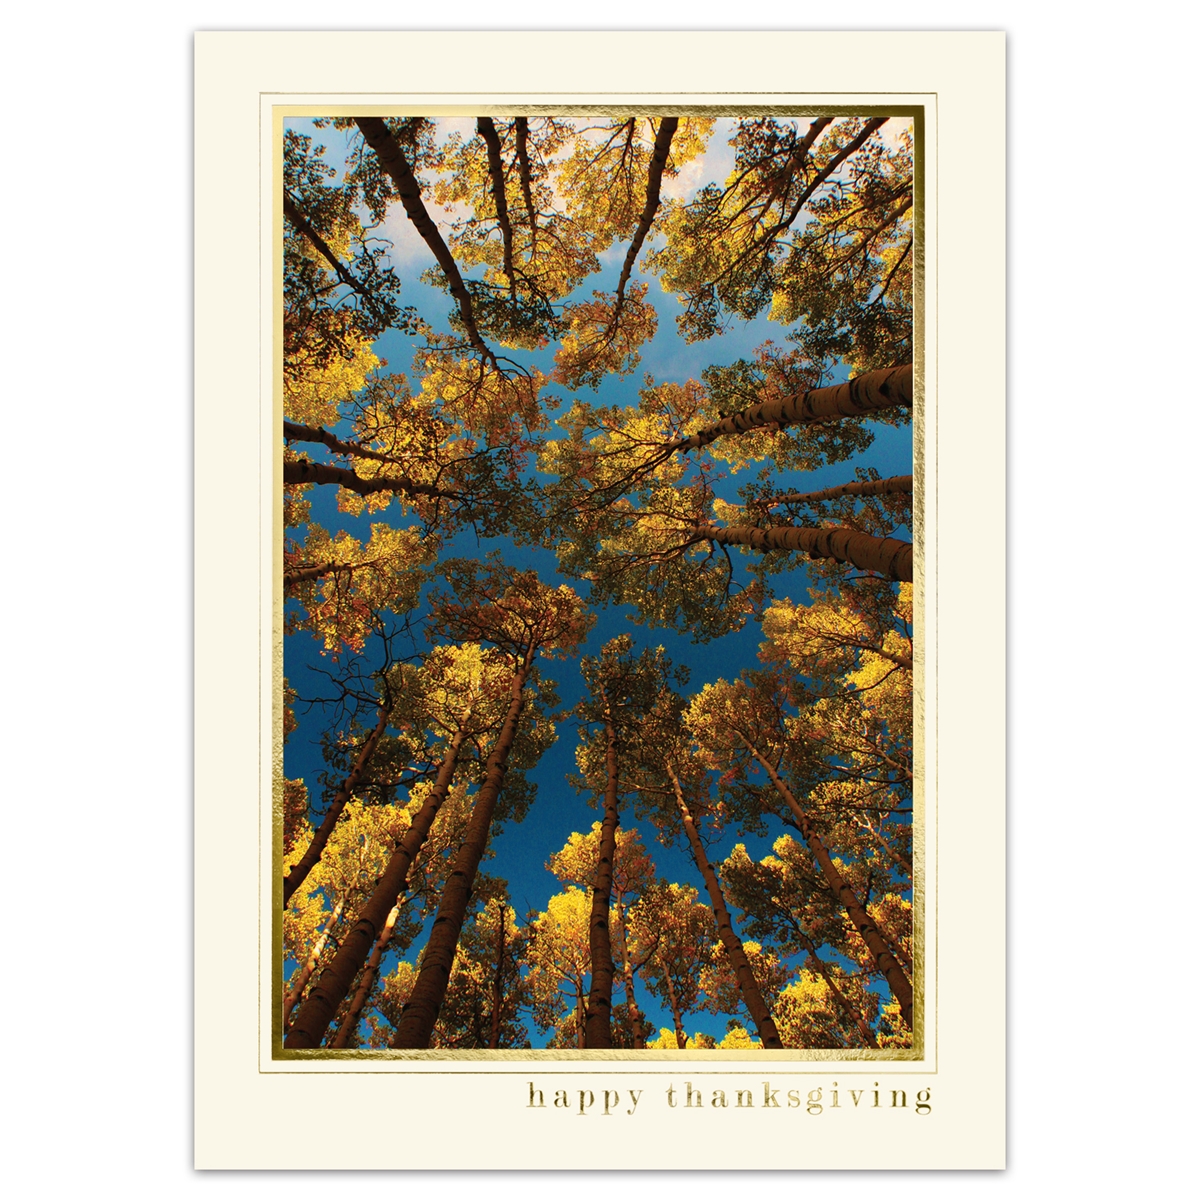 Roof of Aspens Thanksgiving Cards